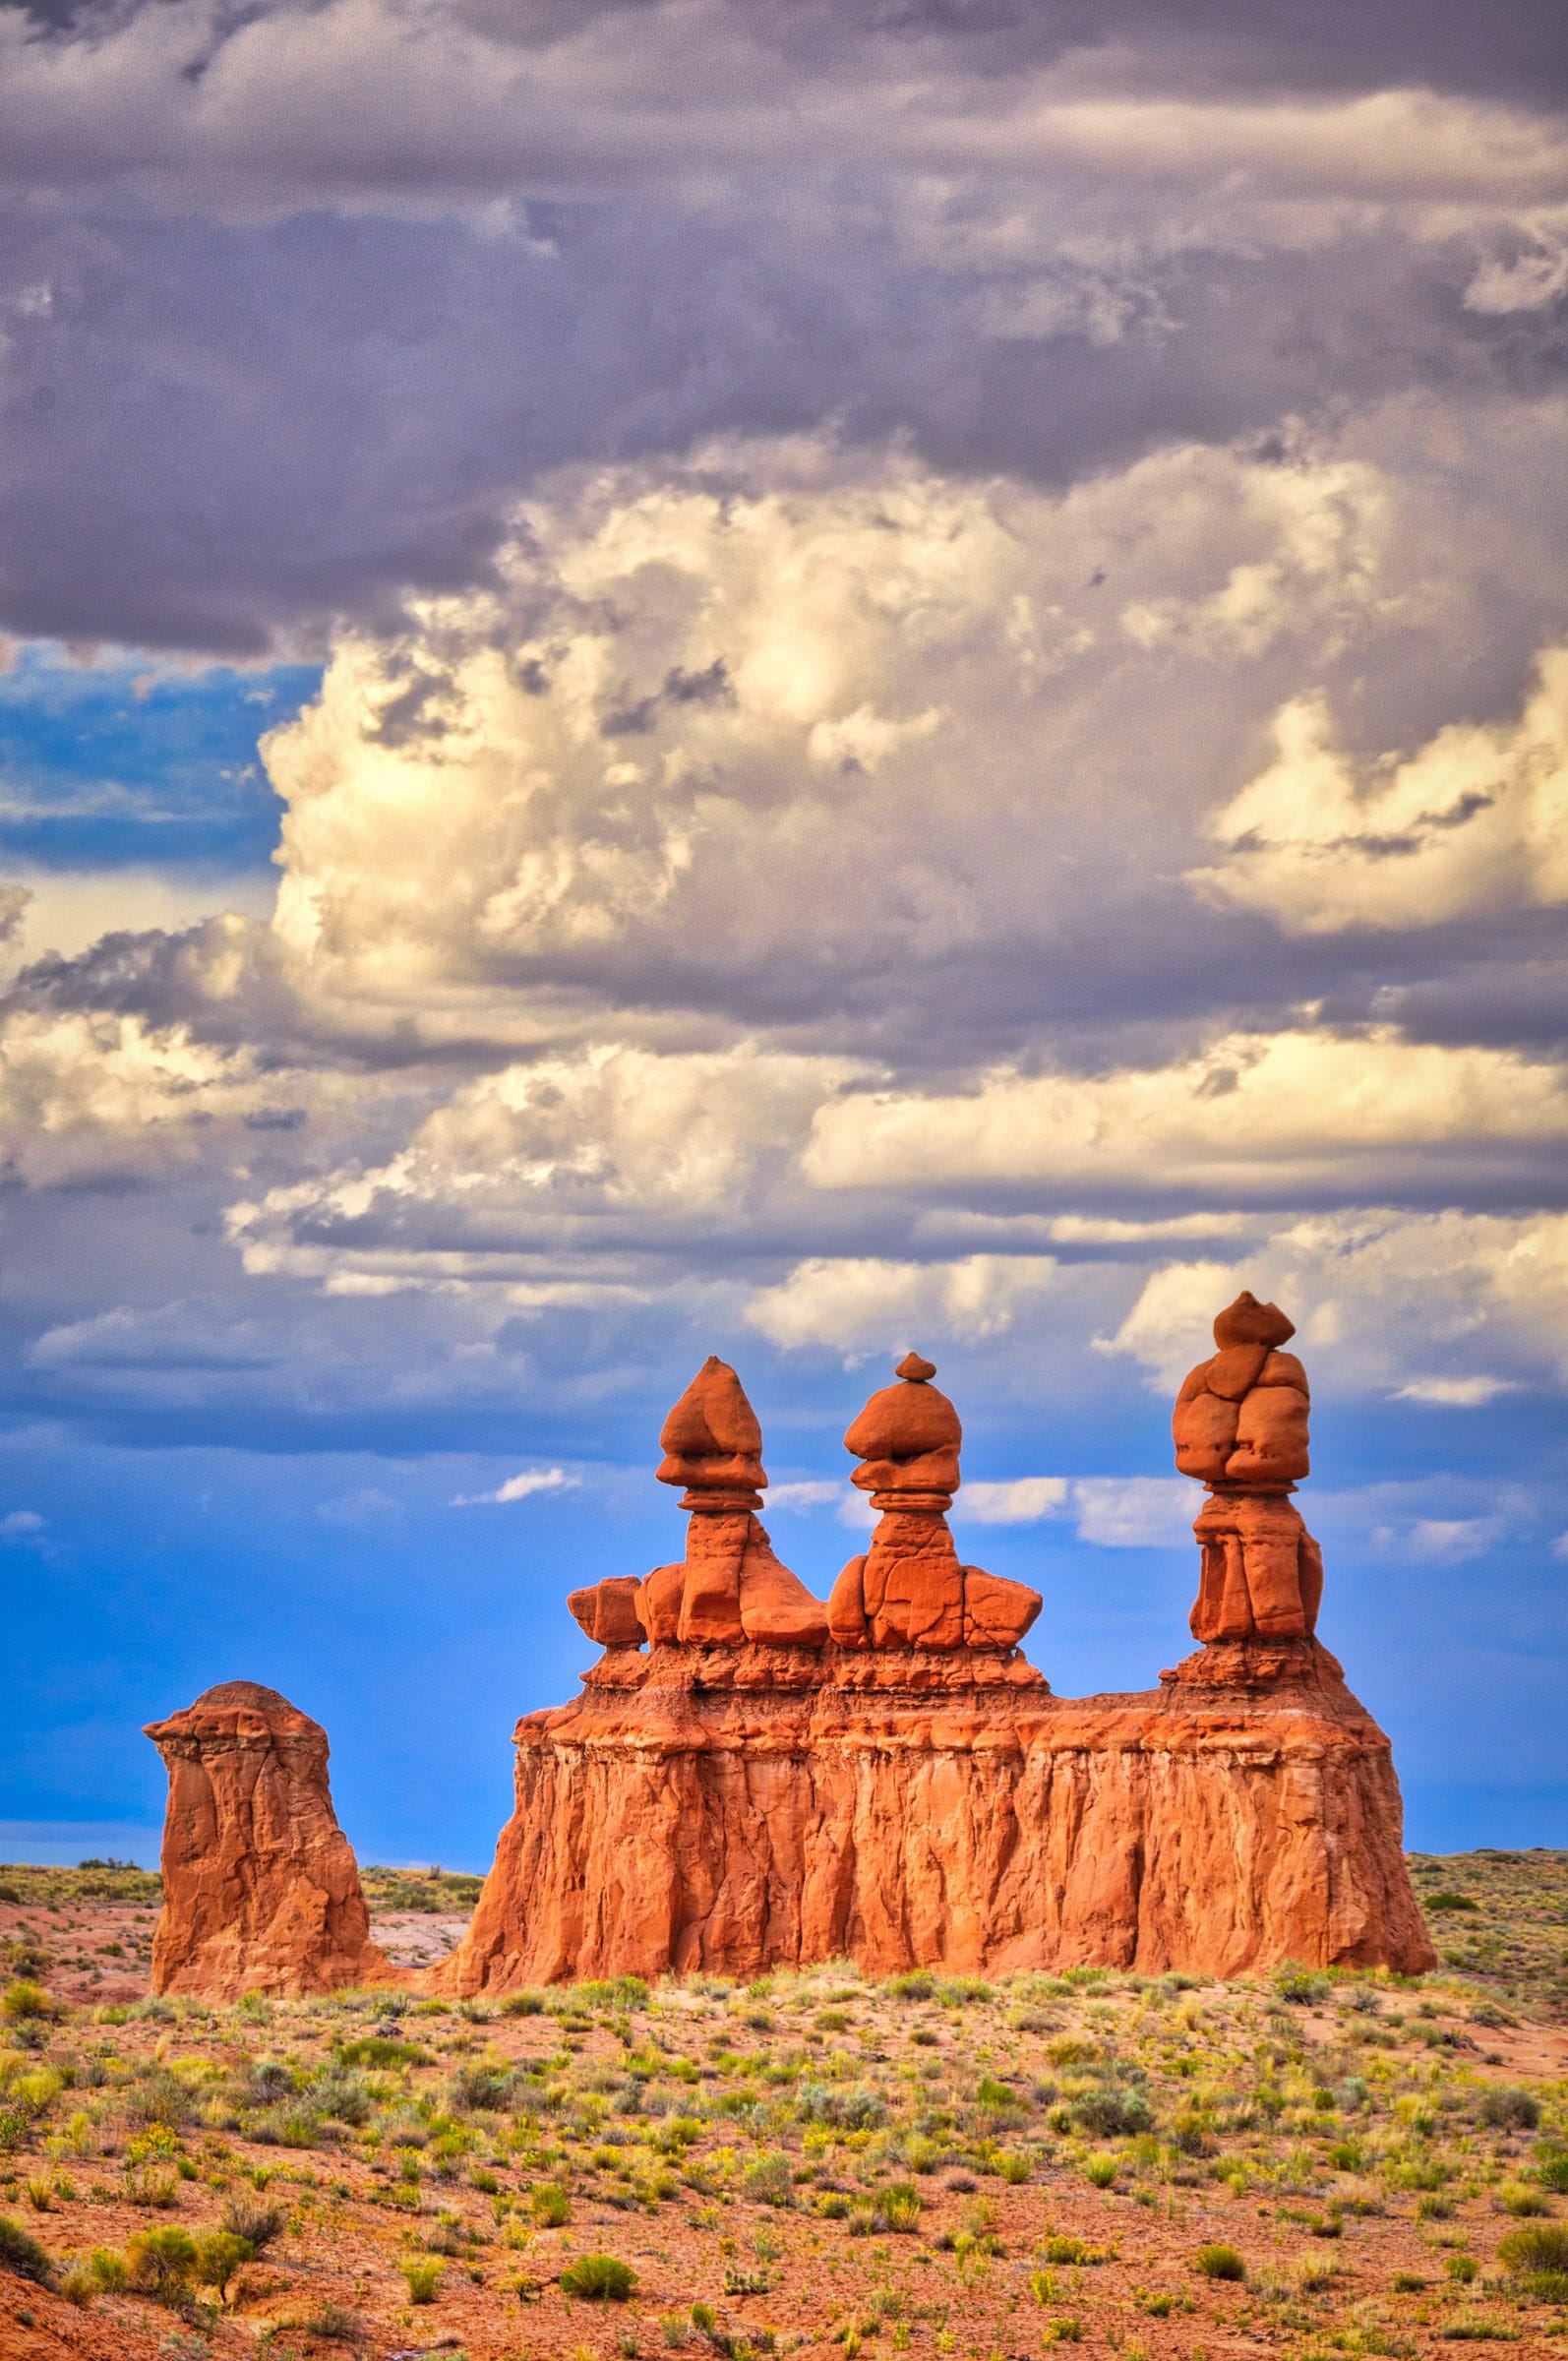 An a storm approaches the formation known as The Judges in Goblin Valley State Park near Hanksville, Utah.